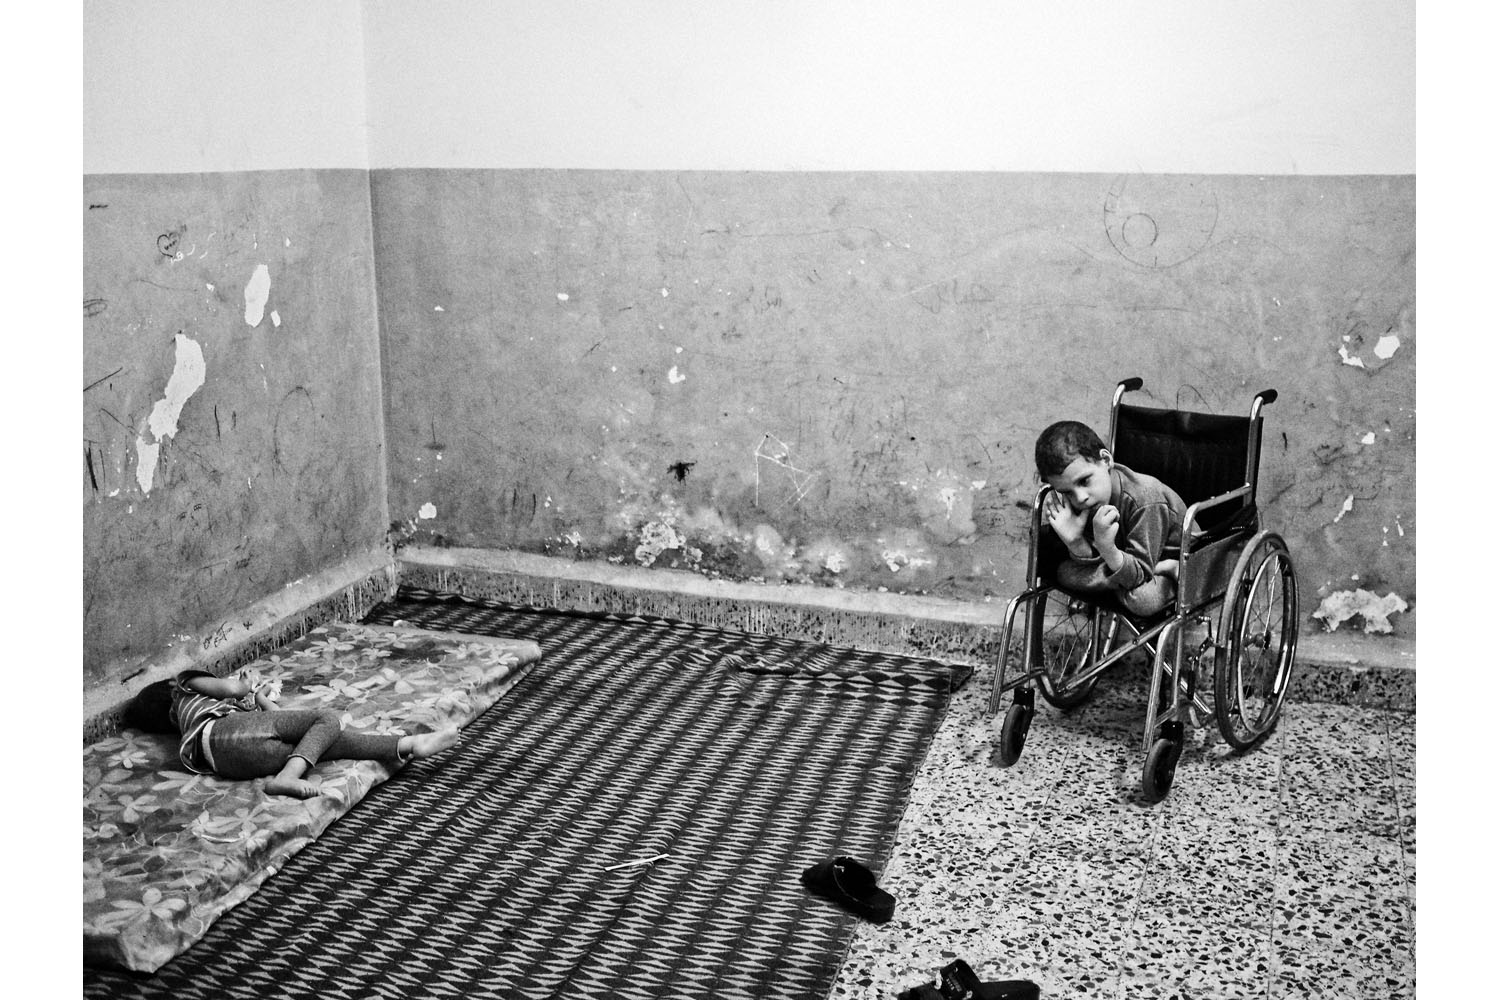 Amman, Jordan. June 2013.8-year-old Hussein(right) and his sister Firyal(left), both suffering from cerebral palsy, inside their family's one-room house in the Wadi Haddad district of East Amman, an area where a large number of Syrian refugees have settled.(Photo by Moises Saman/MAGNUM)